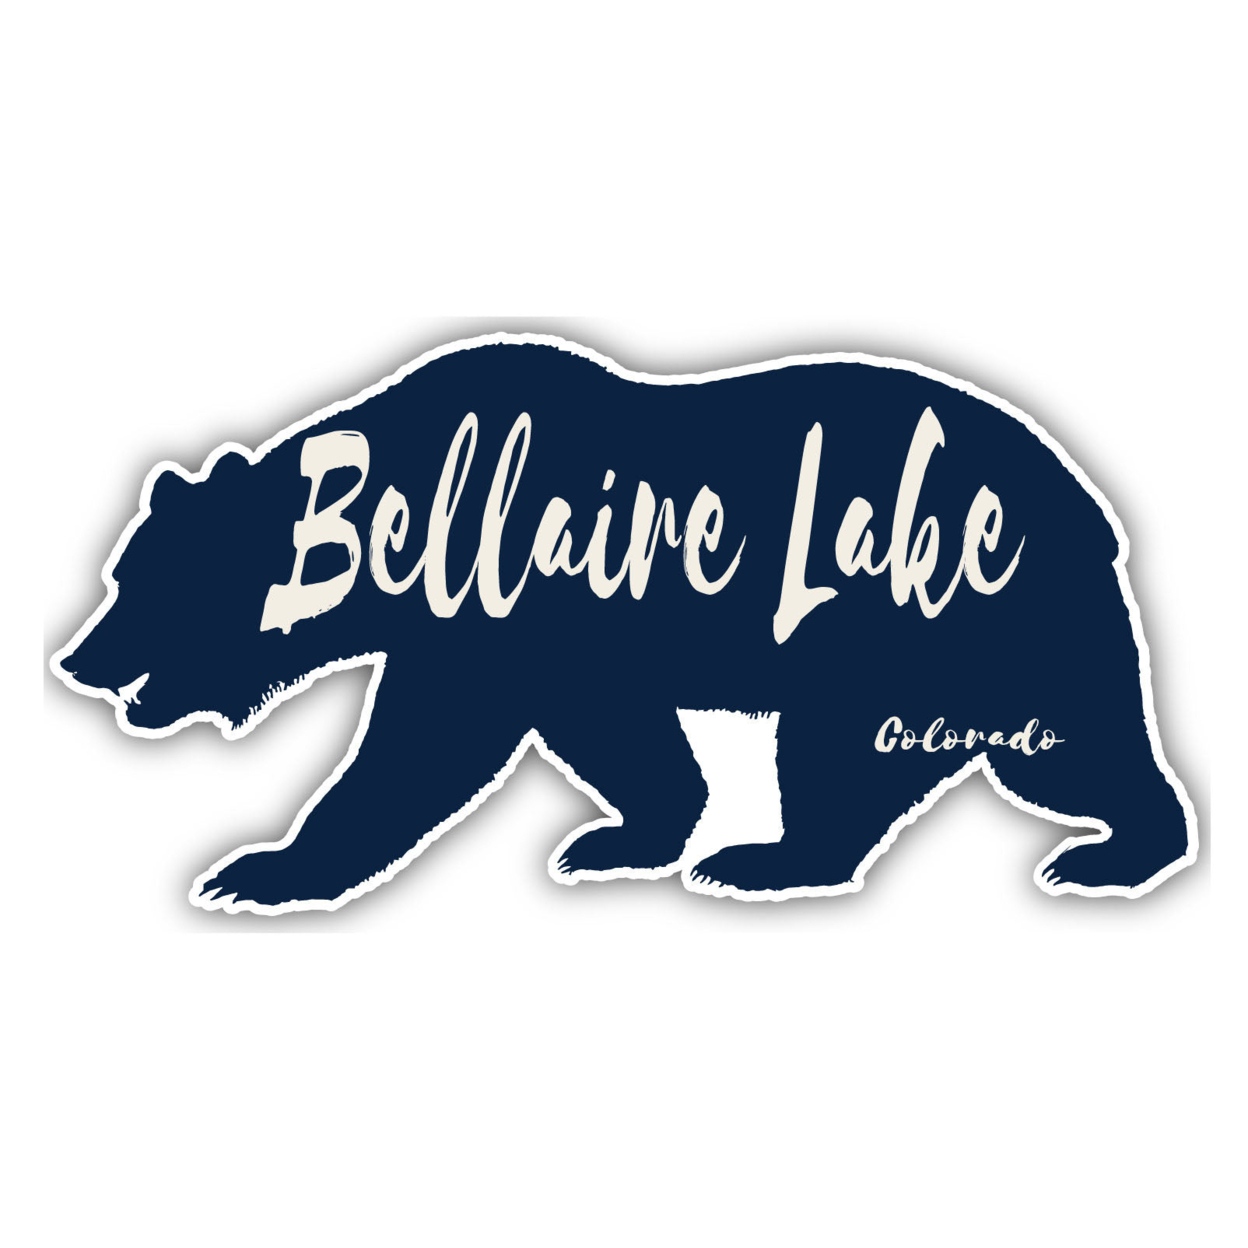 Bellaire Lake Colorado Souvenir Decorative Stickers (Choose Theme And Size) - 4-Pack, 2-Inch, Bear